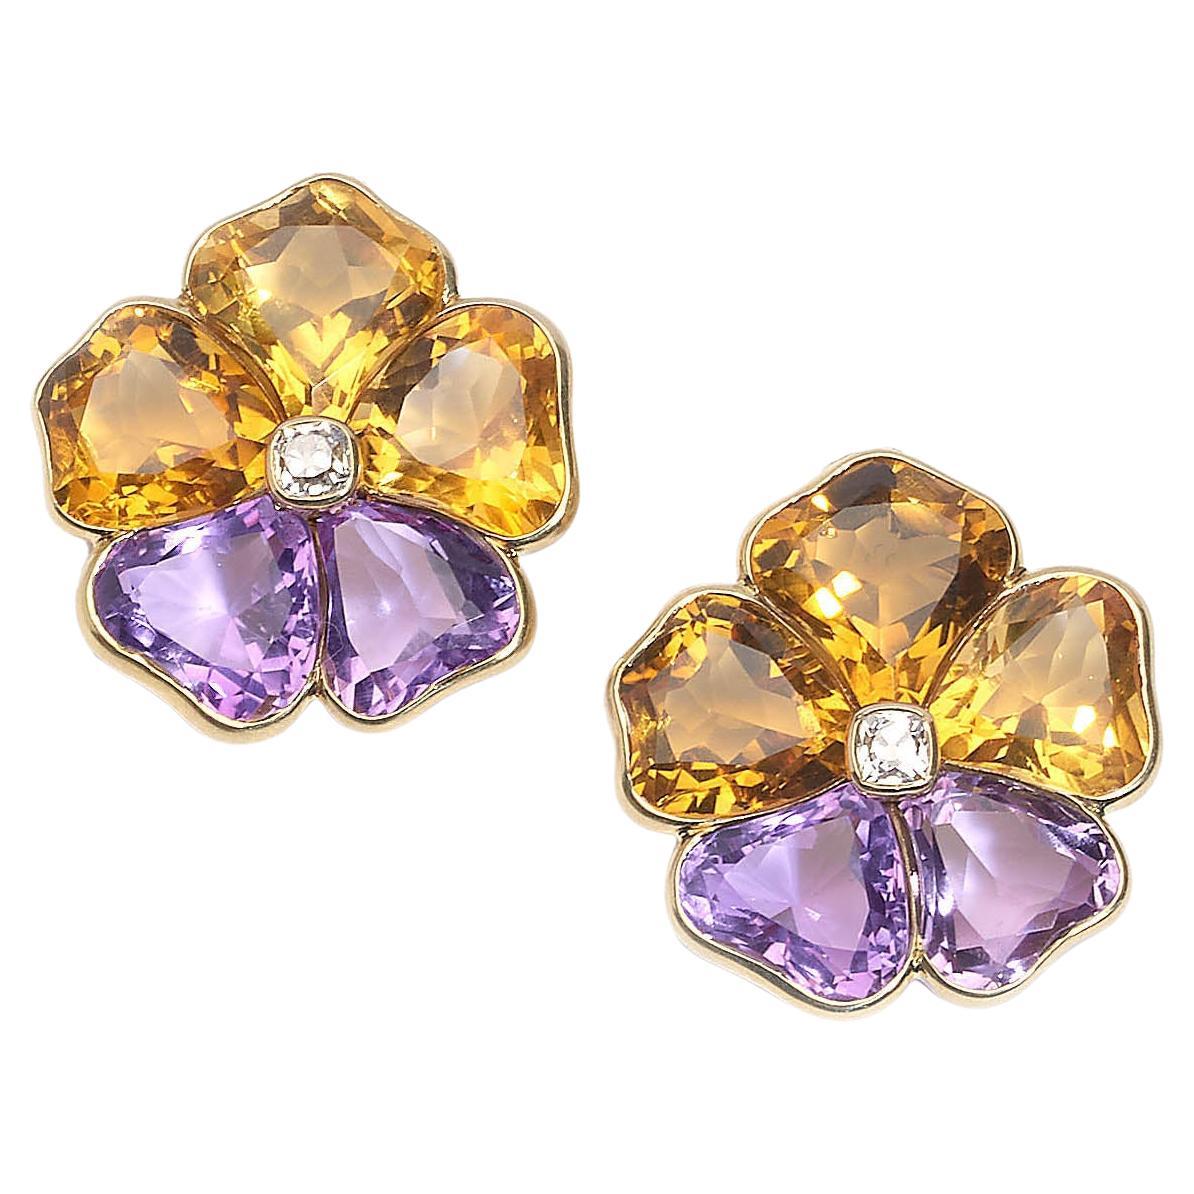 Harvey & Gore Amethyst, Citrine, Diamond and Gold Pansy Earrings, 1973 For Sale